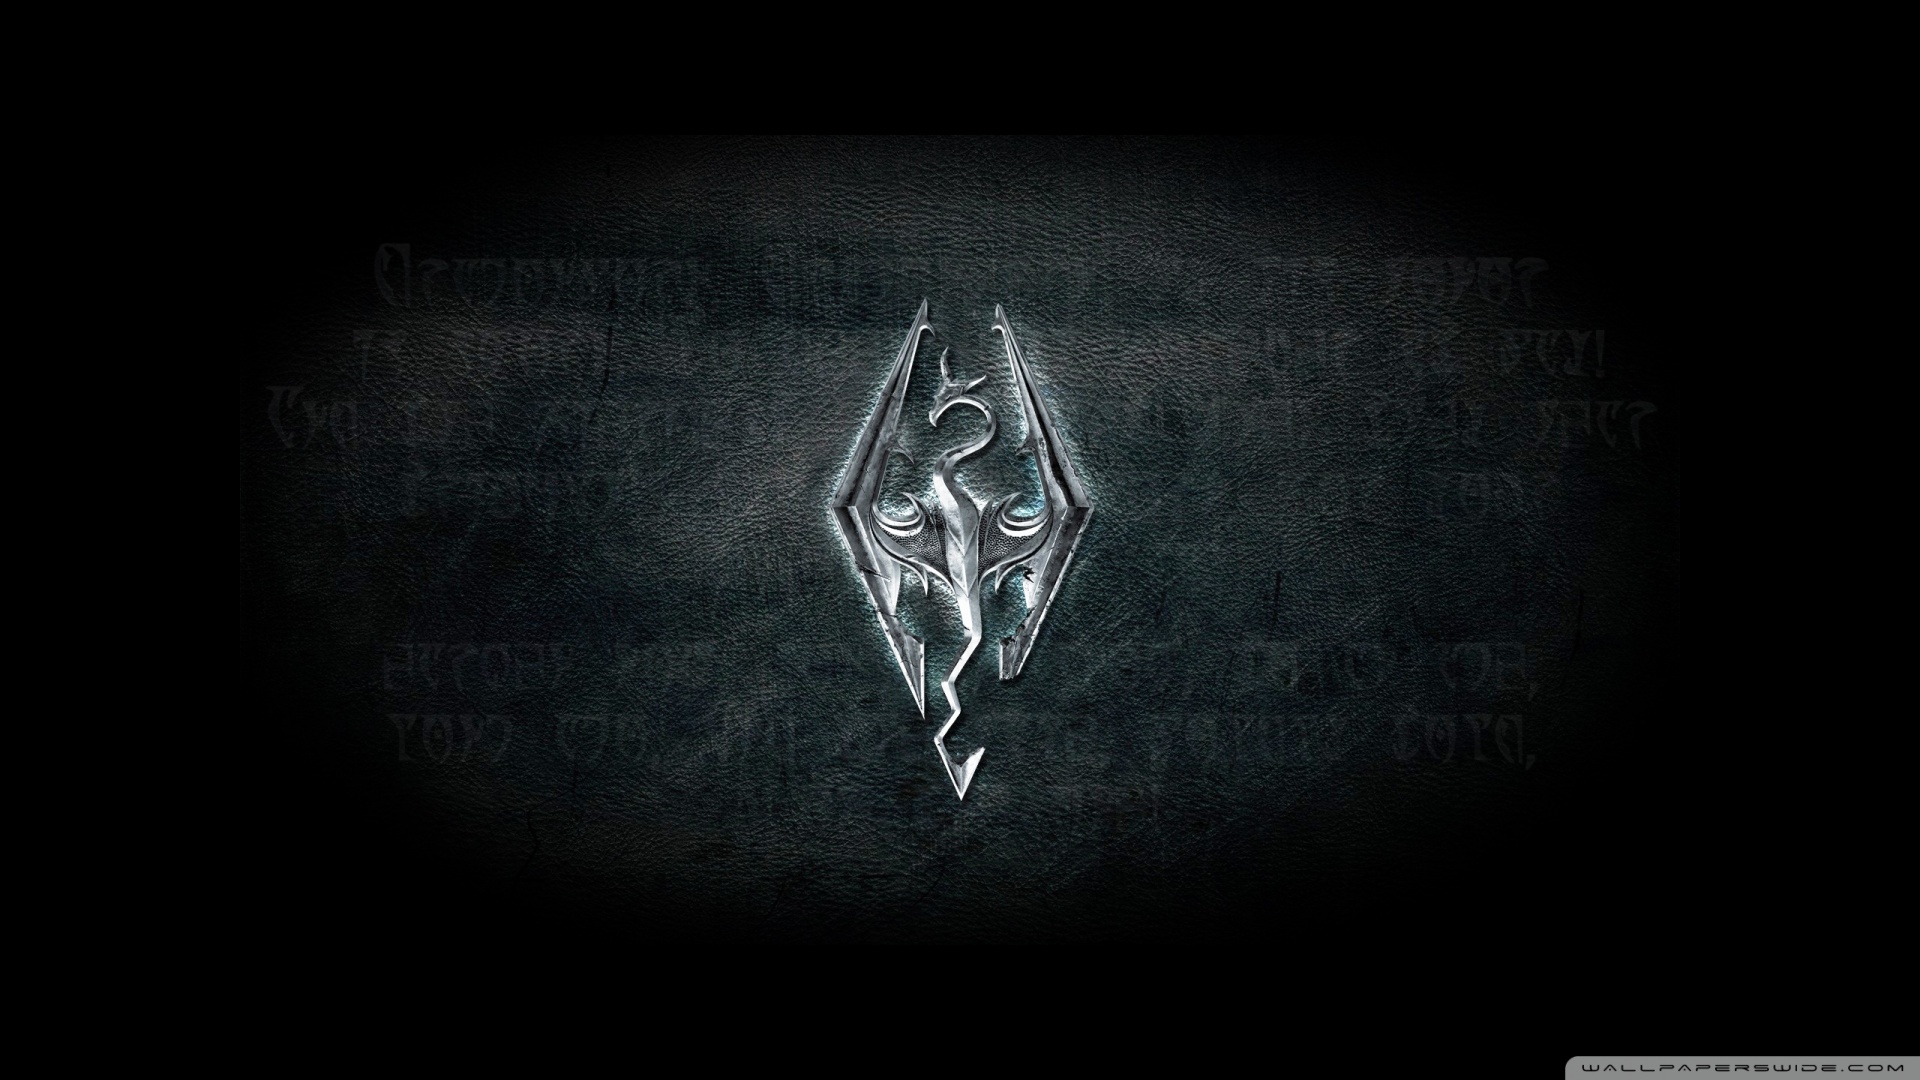 Skyrim Dawnguard Wallpaper Image Amp Pictures Becuo